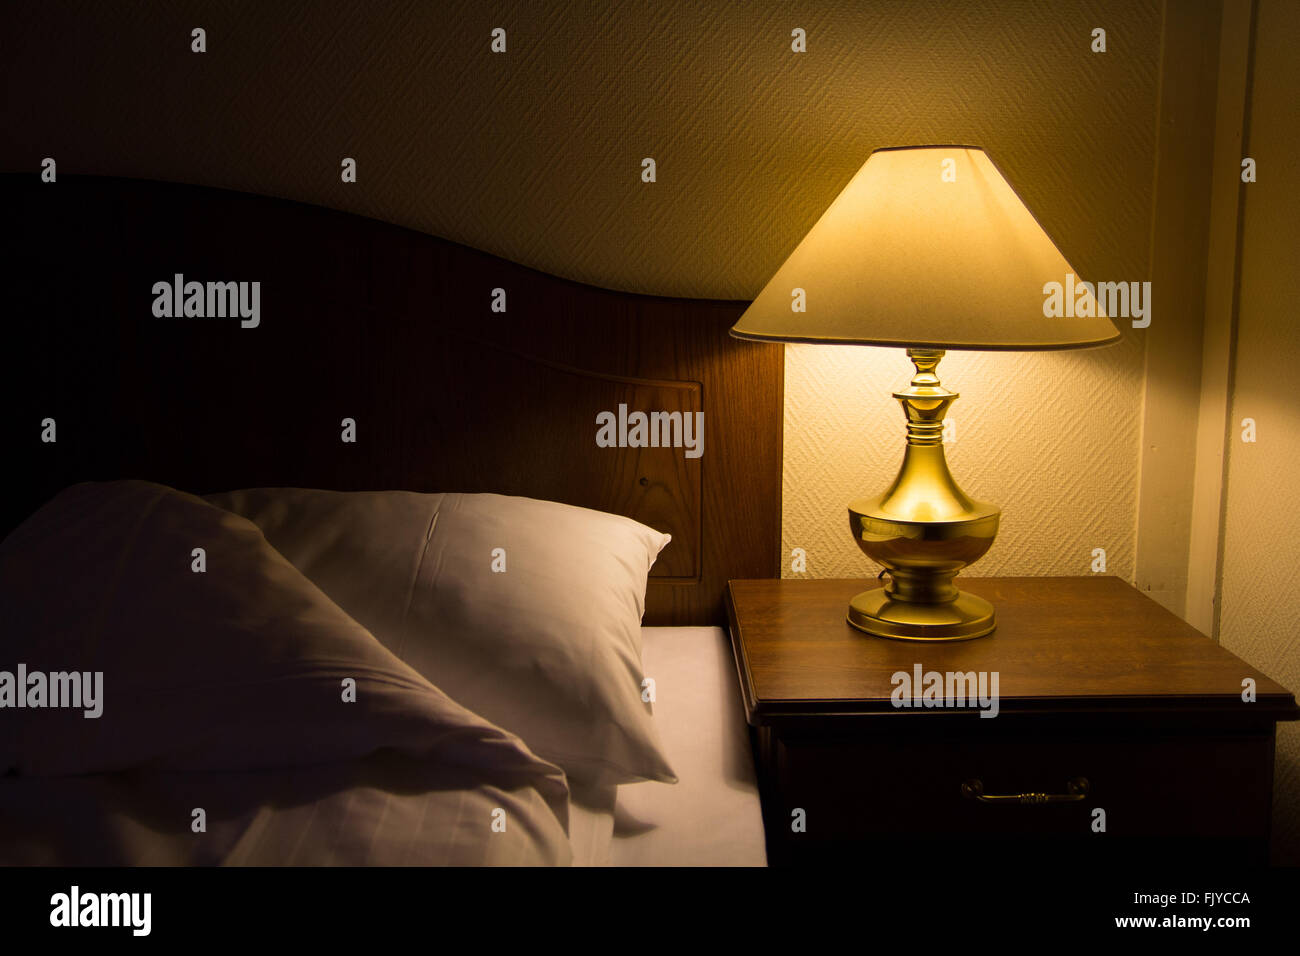 Lamp on a night table next to a bed spreading dimmed yellow light in the room Stock Photo